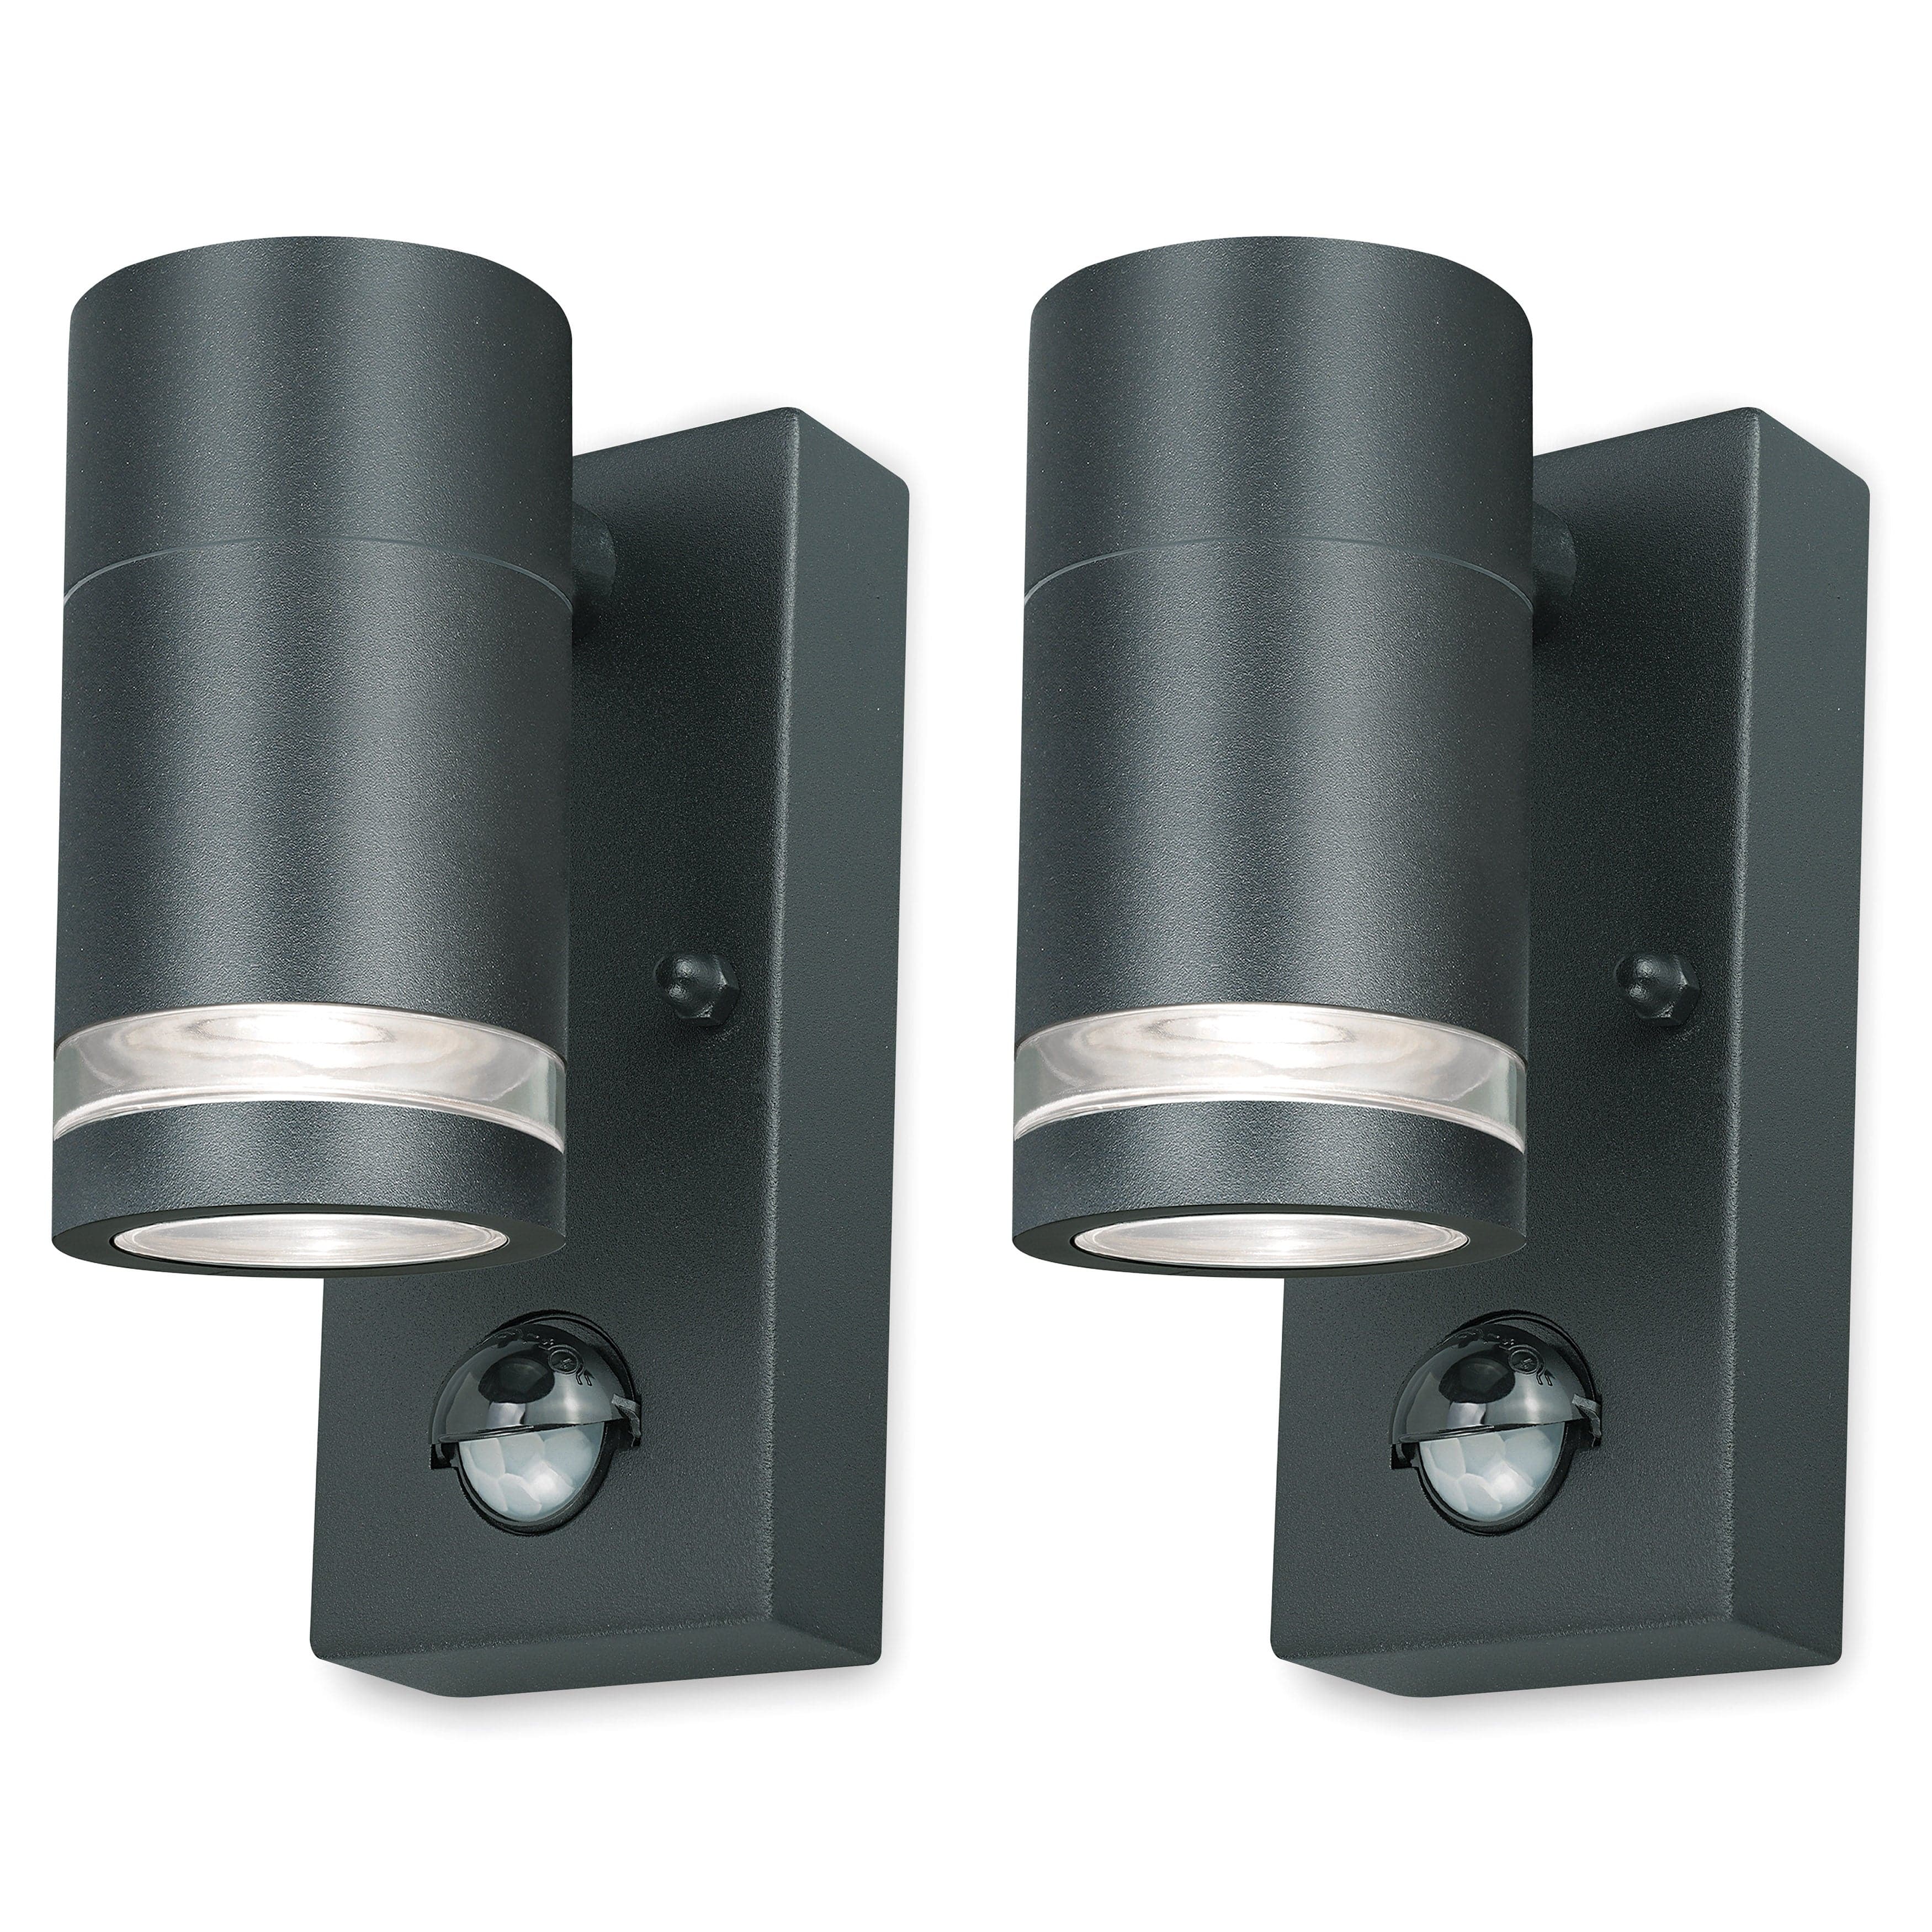 4lite Marinus GU10 Single Direction Outdoor Wall Light with PIR - Anthracite (Pack of 2)